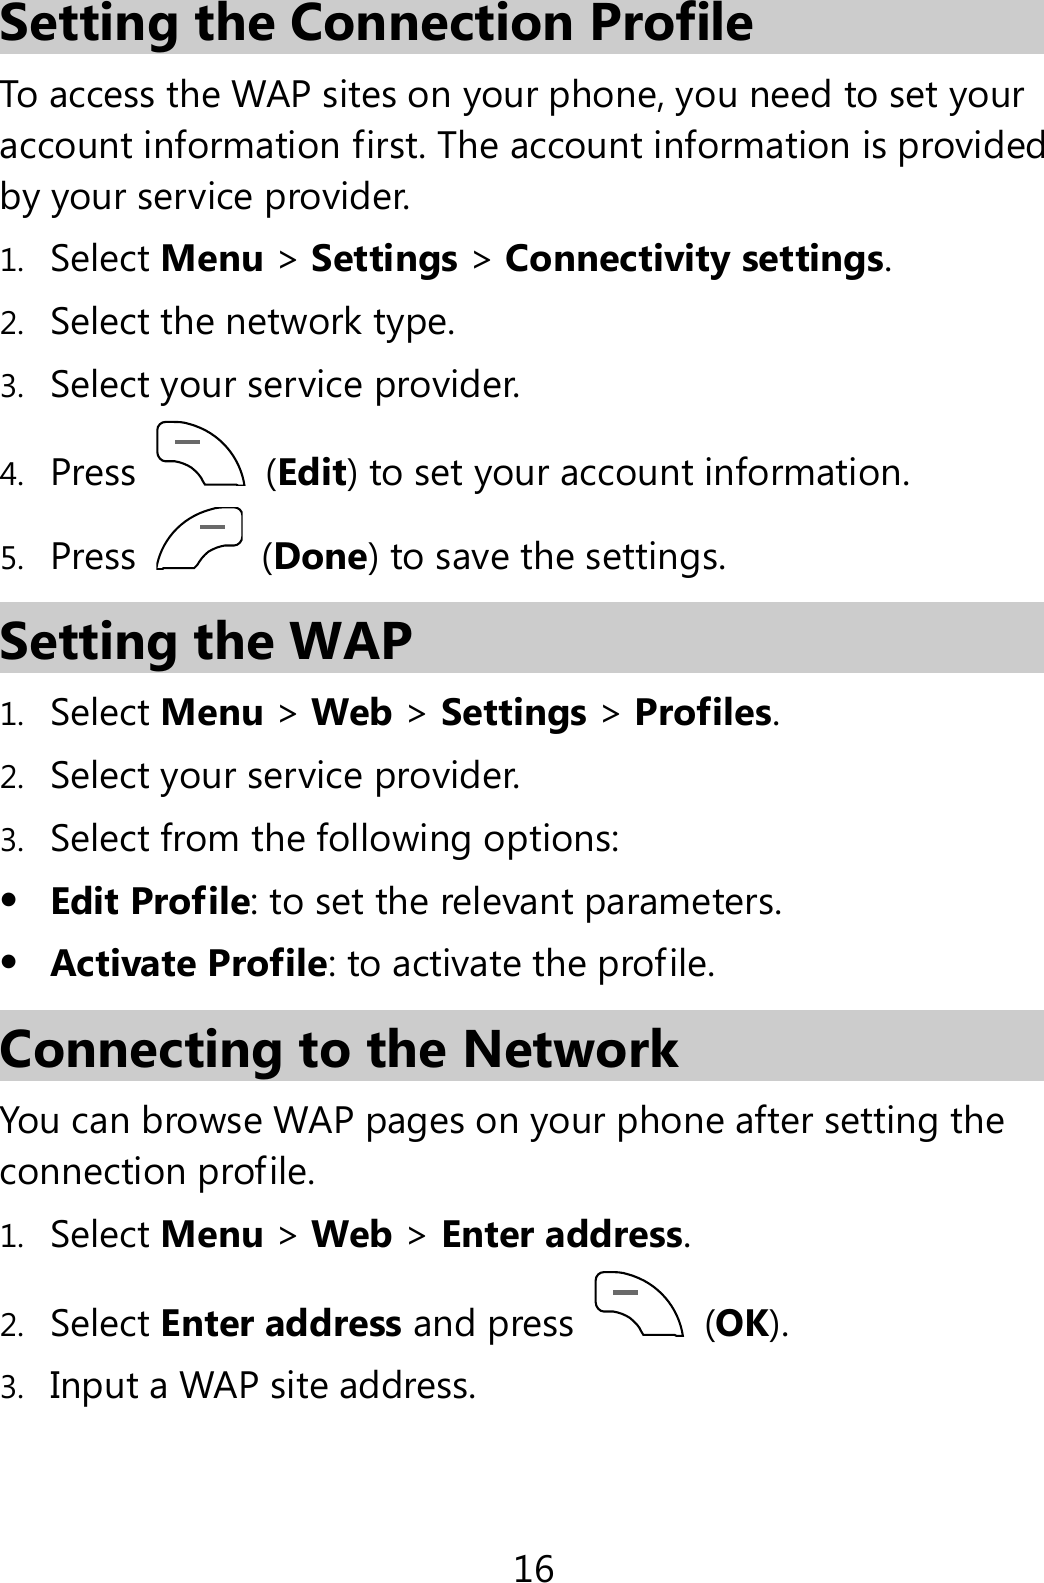 16 Setting the Connection Profile To access the WAP sites on your phone, you need to set your account information first. The account information is provided by your service provider. 1. Select Menu &gt; Settings &gt; Connectivity settings. 2. Select the network type. 3. Select your service provider. 4. Press   (Edit) to set your account information. 5. Press   (Done) to save the settings. Setting the WAP 1. Select Menu &gt; Web &gt; Settings &gt; Profiles. 2. Select your service provider. 3. Select from the following options:  Edit Profile: to set the relevant parameters.  Activate Profile: to activate the profile. Connecting to the Network You can browse WAP pages on your phone after setting the connection profile. 1. Select Menu &gt; Web &gt; Enter address. 2. Select Enter address and press   (OK). 3. Input a WAP site address. 